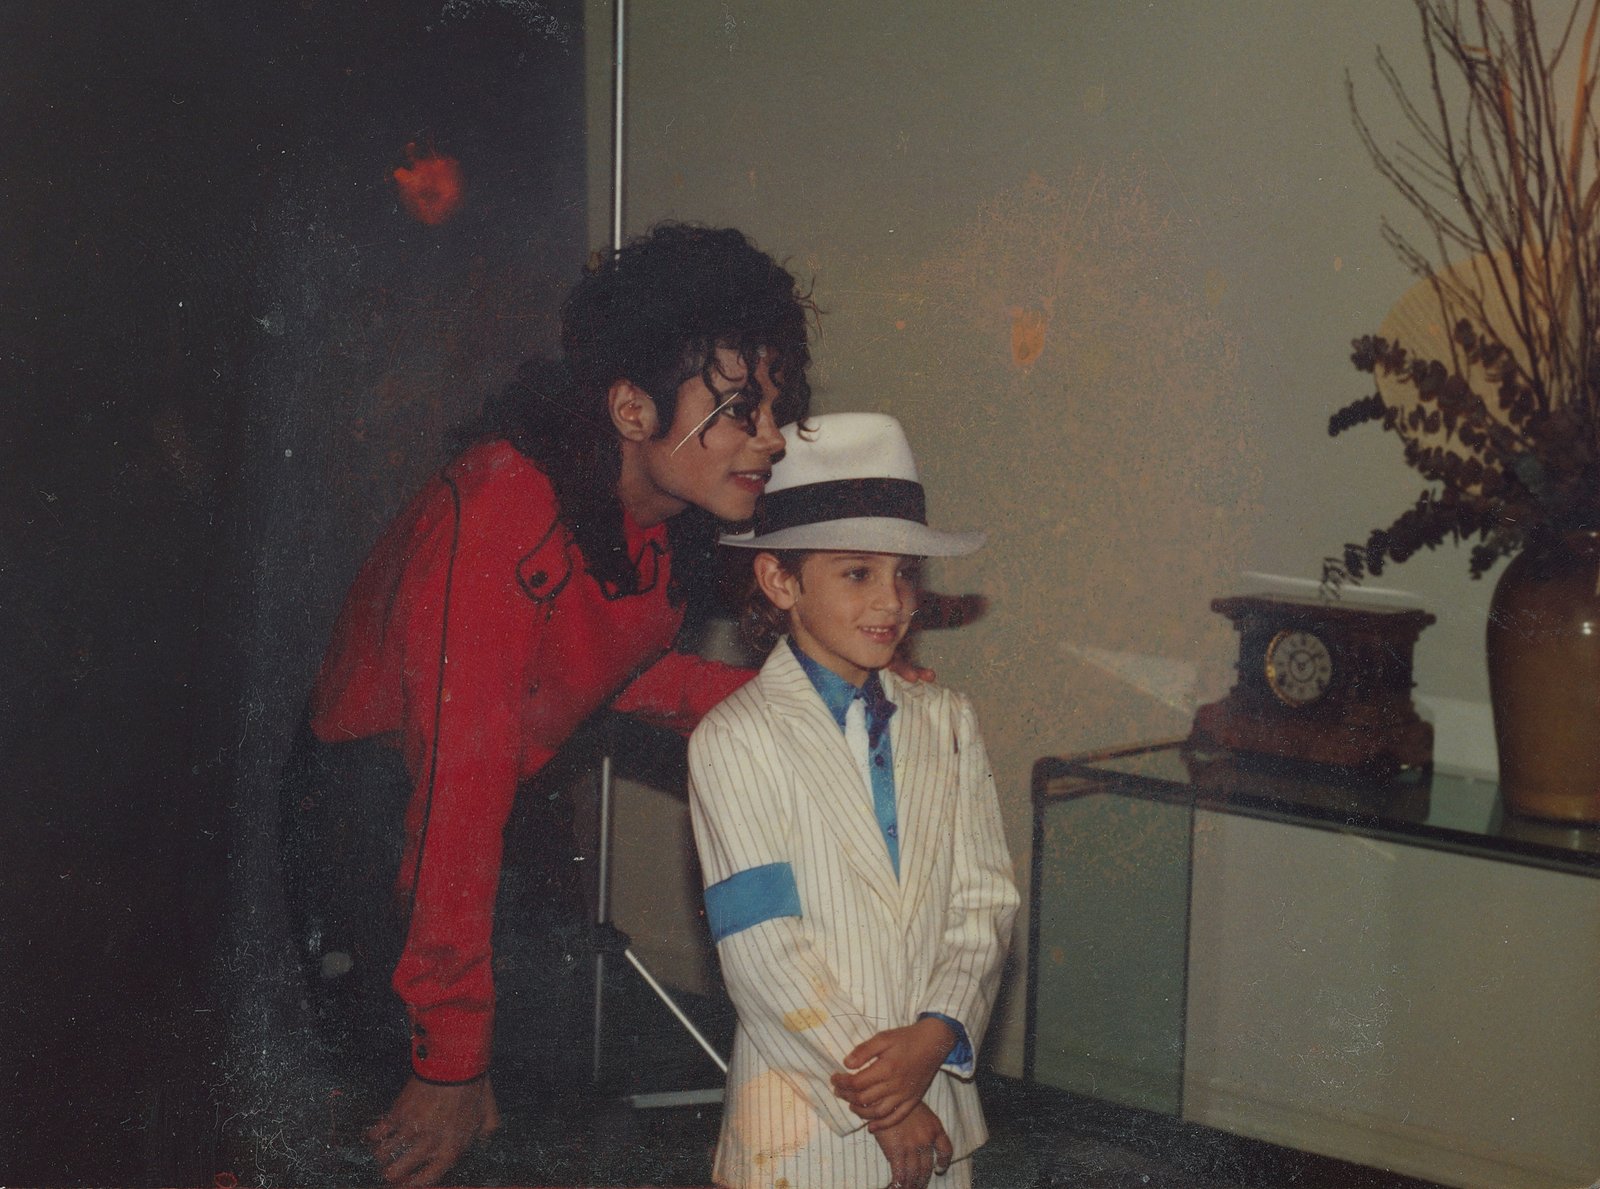 Wade Robson with Michael Jackson when he was a kid.